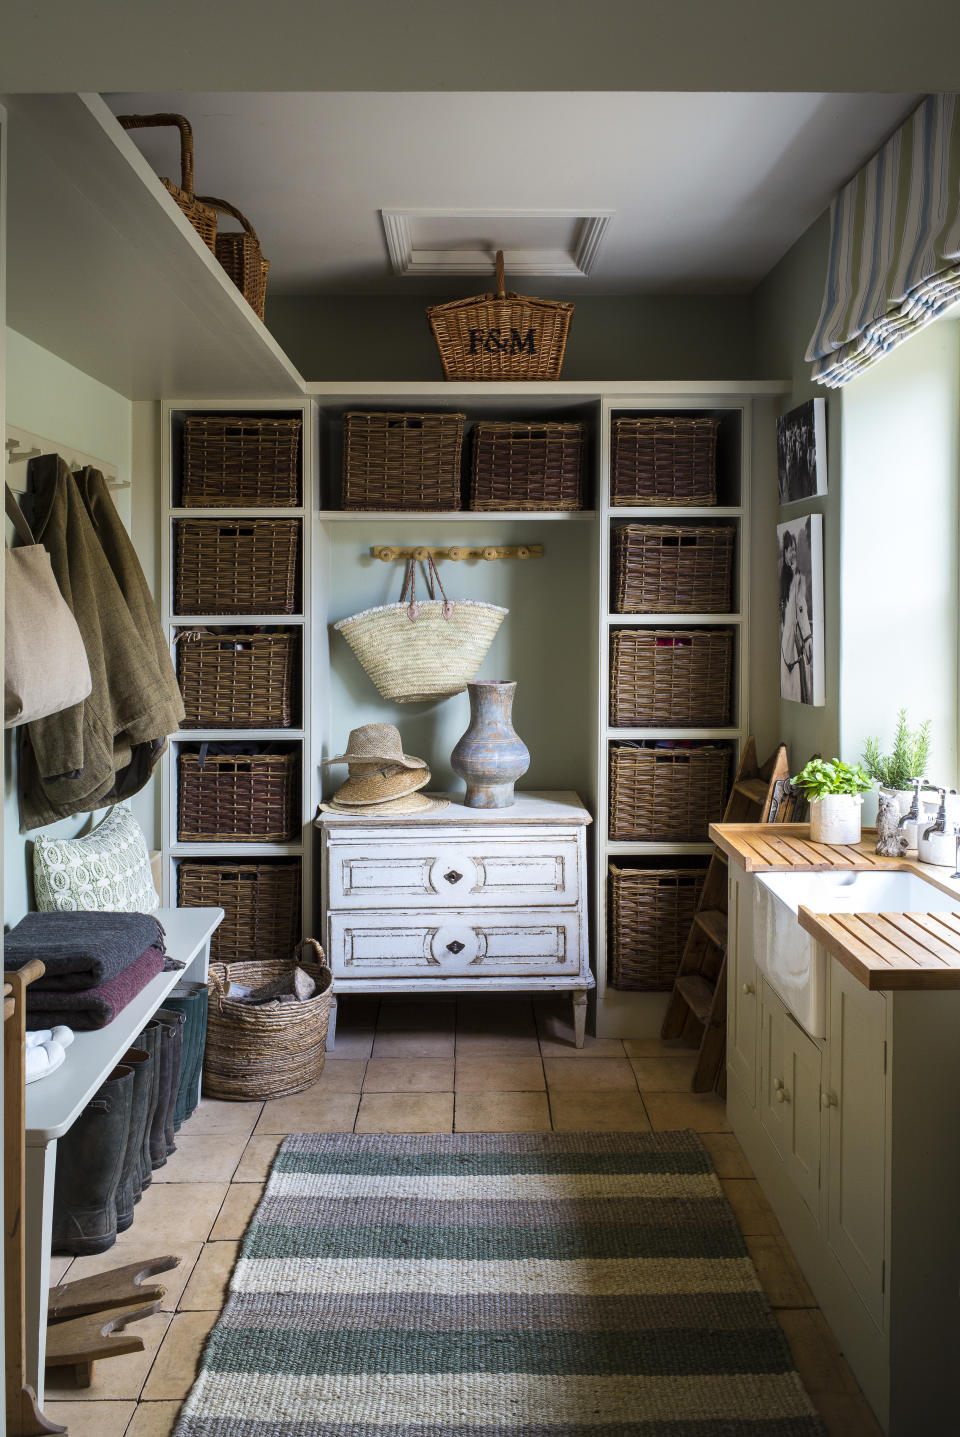 <p> Mudroom ideas that you'll see when searching on the internet are generally fitted spaces because that's the most space efficient way to use the room and to keep it neat and clean. </p> <p> However, making room for a freestanding piece will give the room more character. </p> <p> 'I love how this mudroom has been given a focal point that's all about display, while still offering storage for all those bits and pieces that these rooms gather,' says Lucy Searle. </p> <p> 'It would have been easy to fit this niche with more of the same storage but this antique piece brings charm and character into the room that can't be achieved with fitted furniture.' </p>